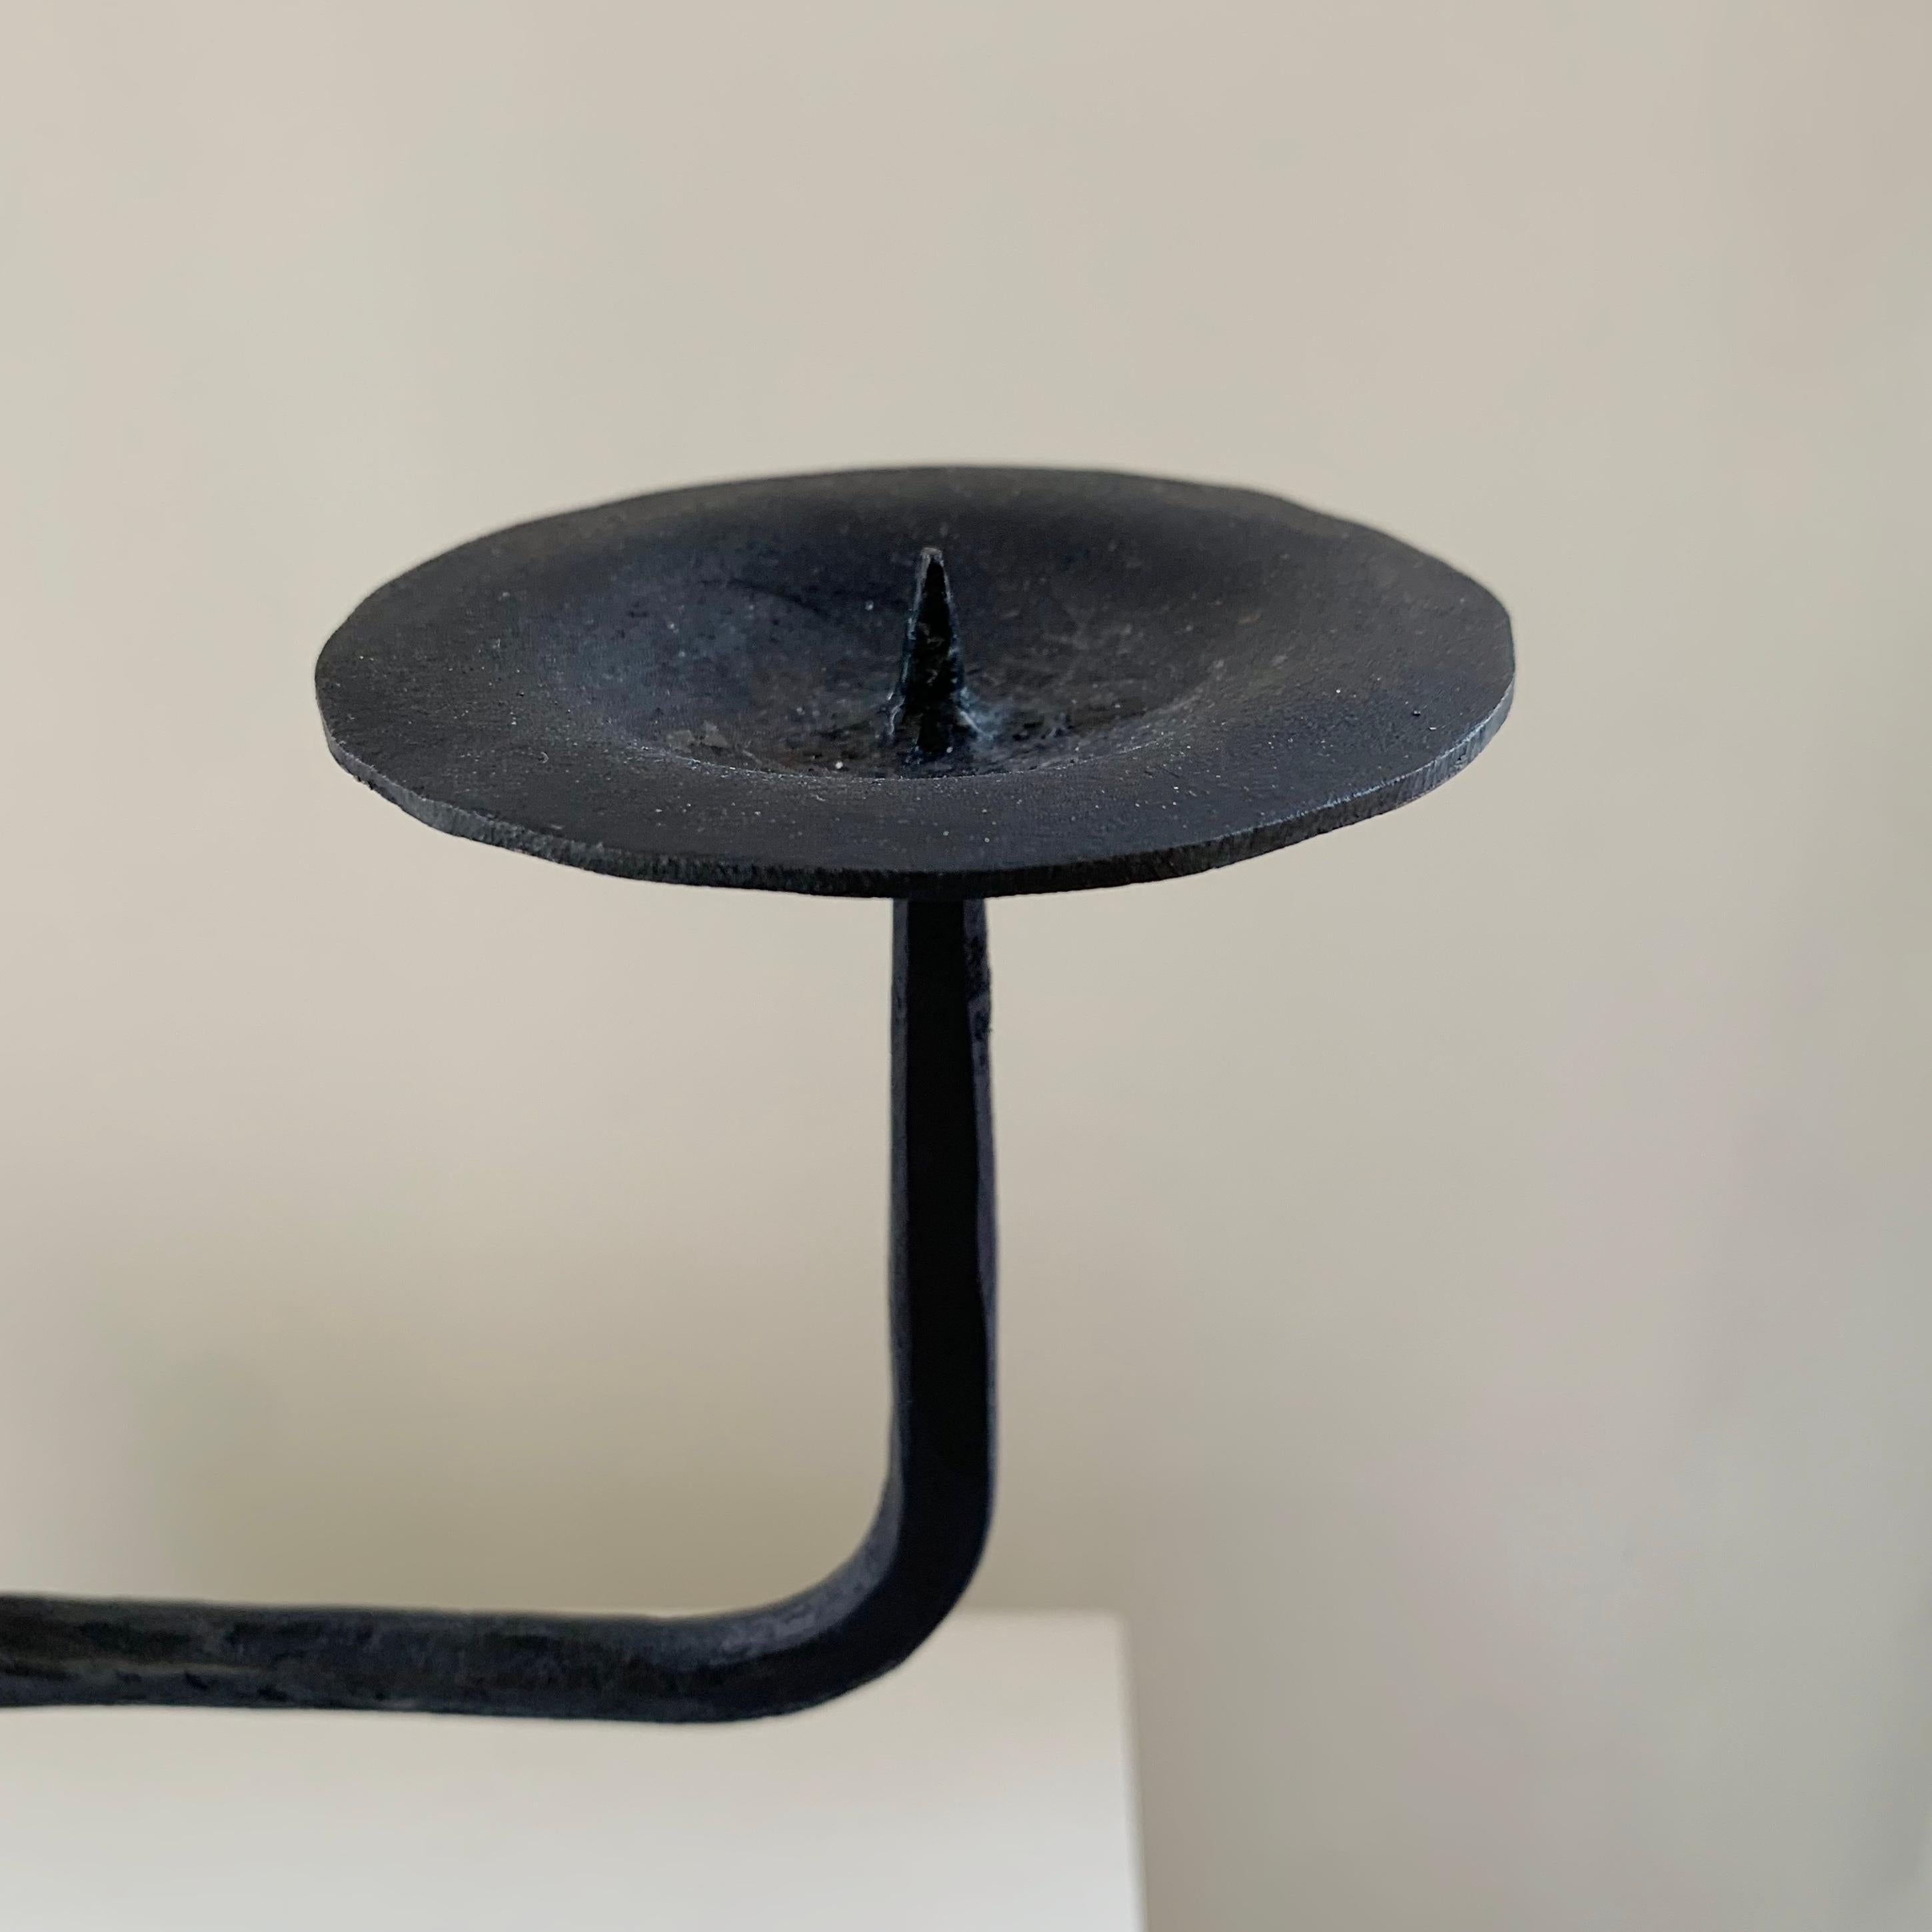 Wrought Iron Candlestick in the Style of Ateliers de Marolles, France c.1950 For Sale 3